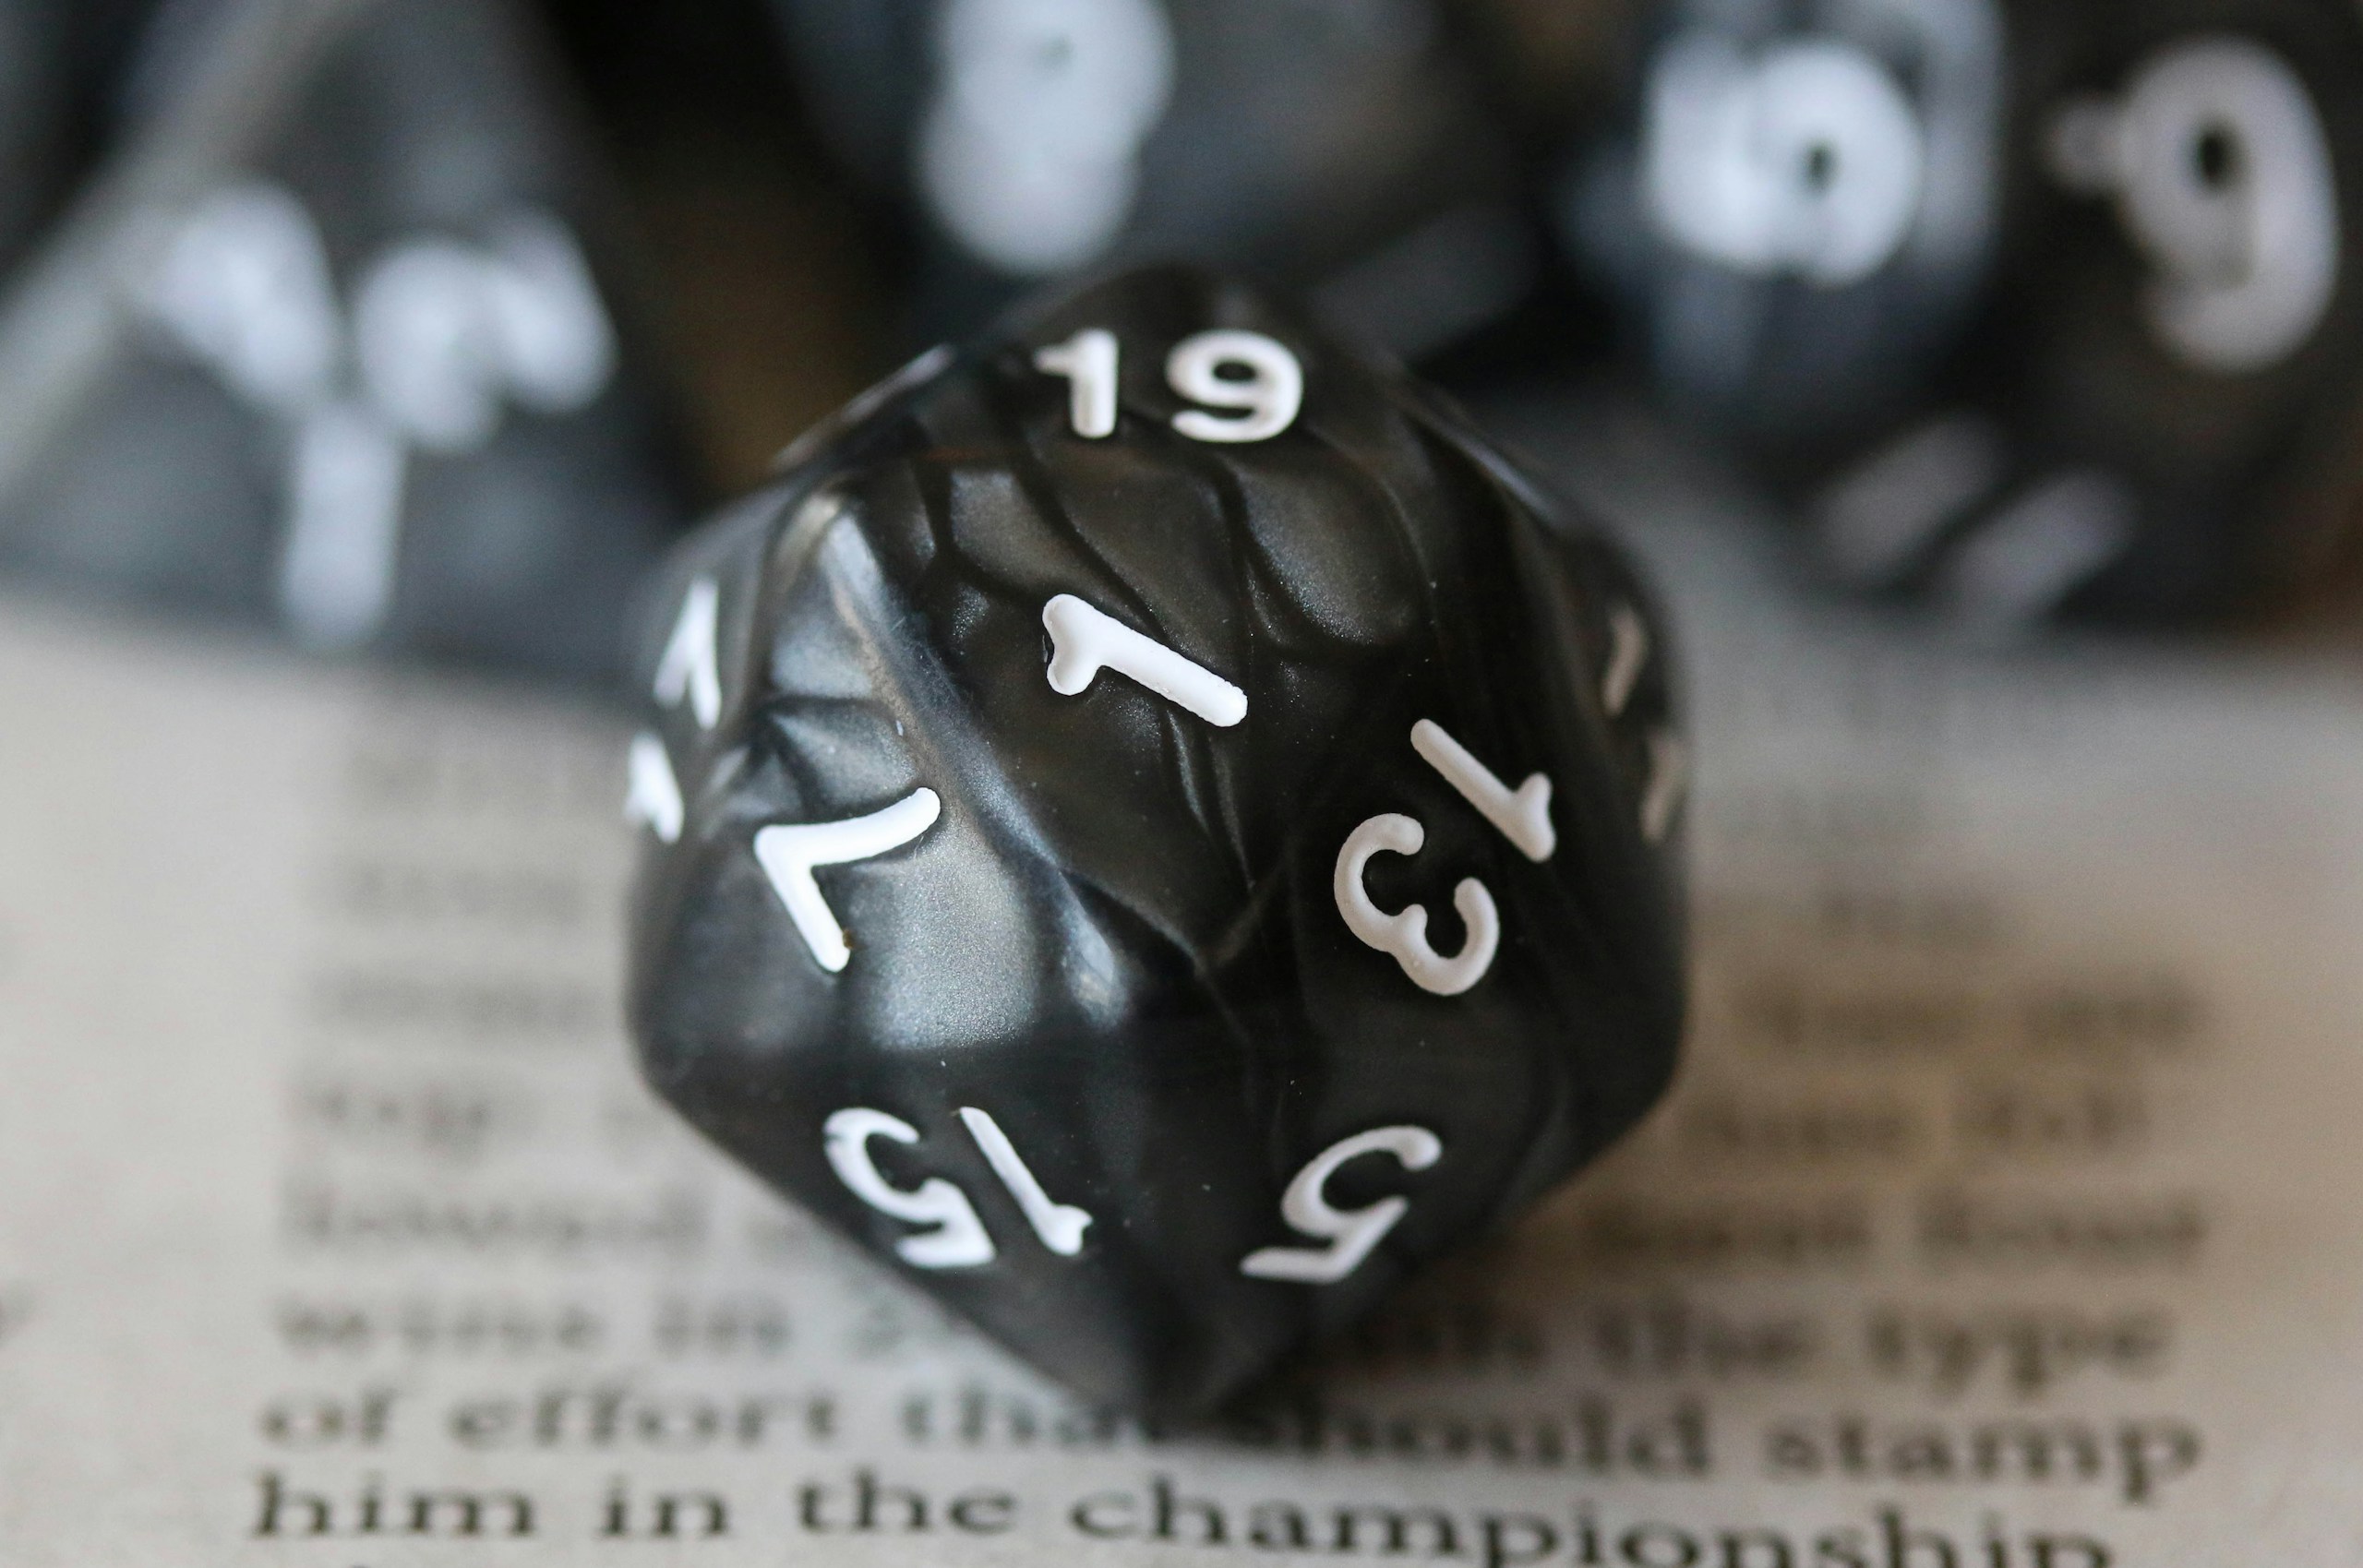 Dungeons and Dragons dice showing a nat 1 rolled on a d20.